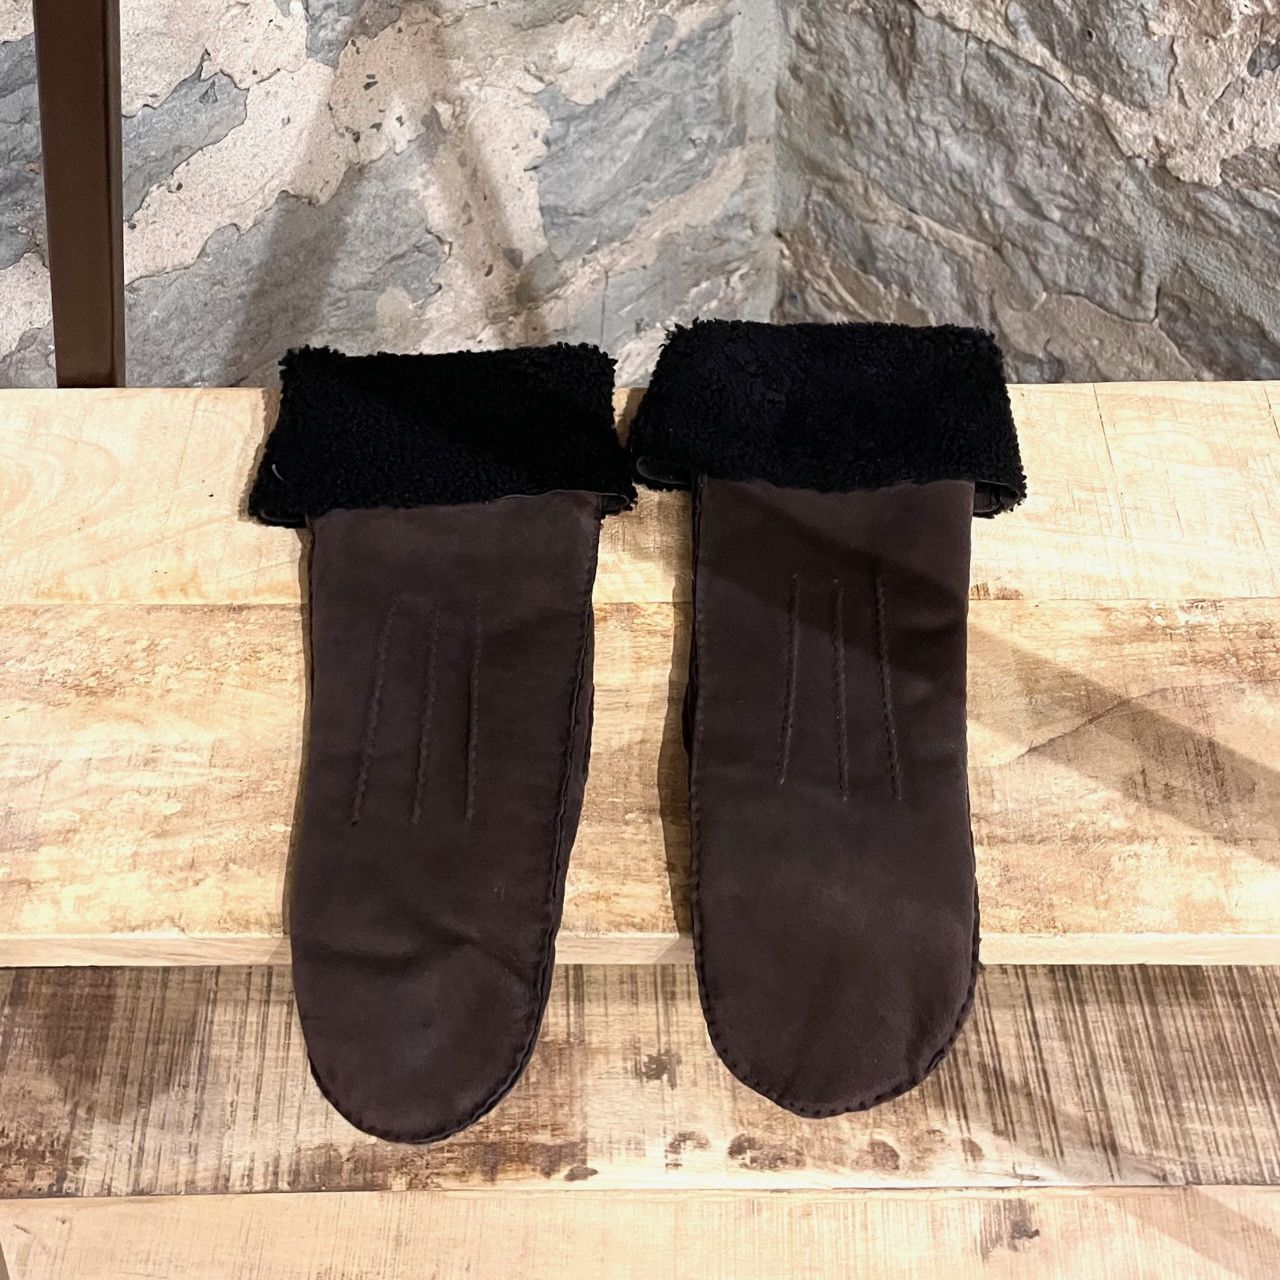 Marni Marni Chocolate Brown Suede Mittens Size ONE SIZE - 2 Preview